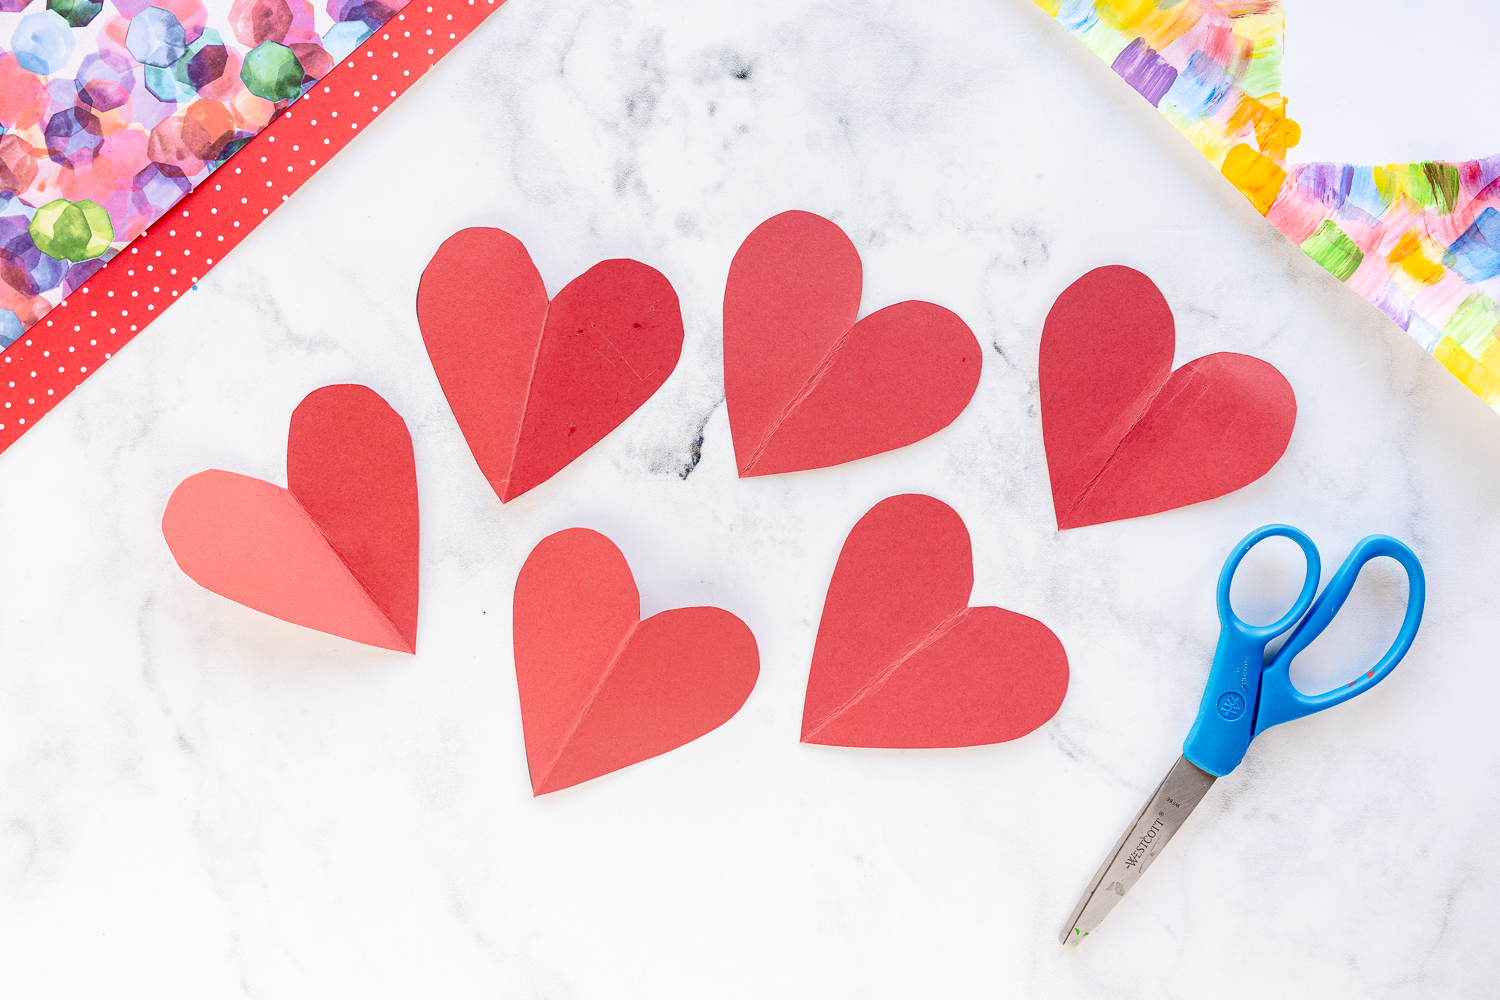 cut out hearts from red paper